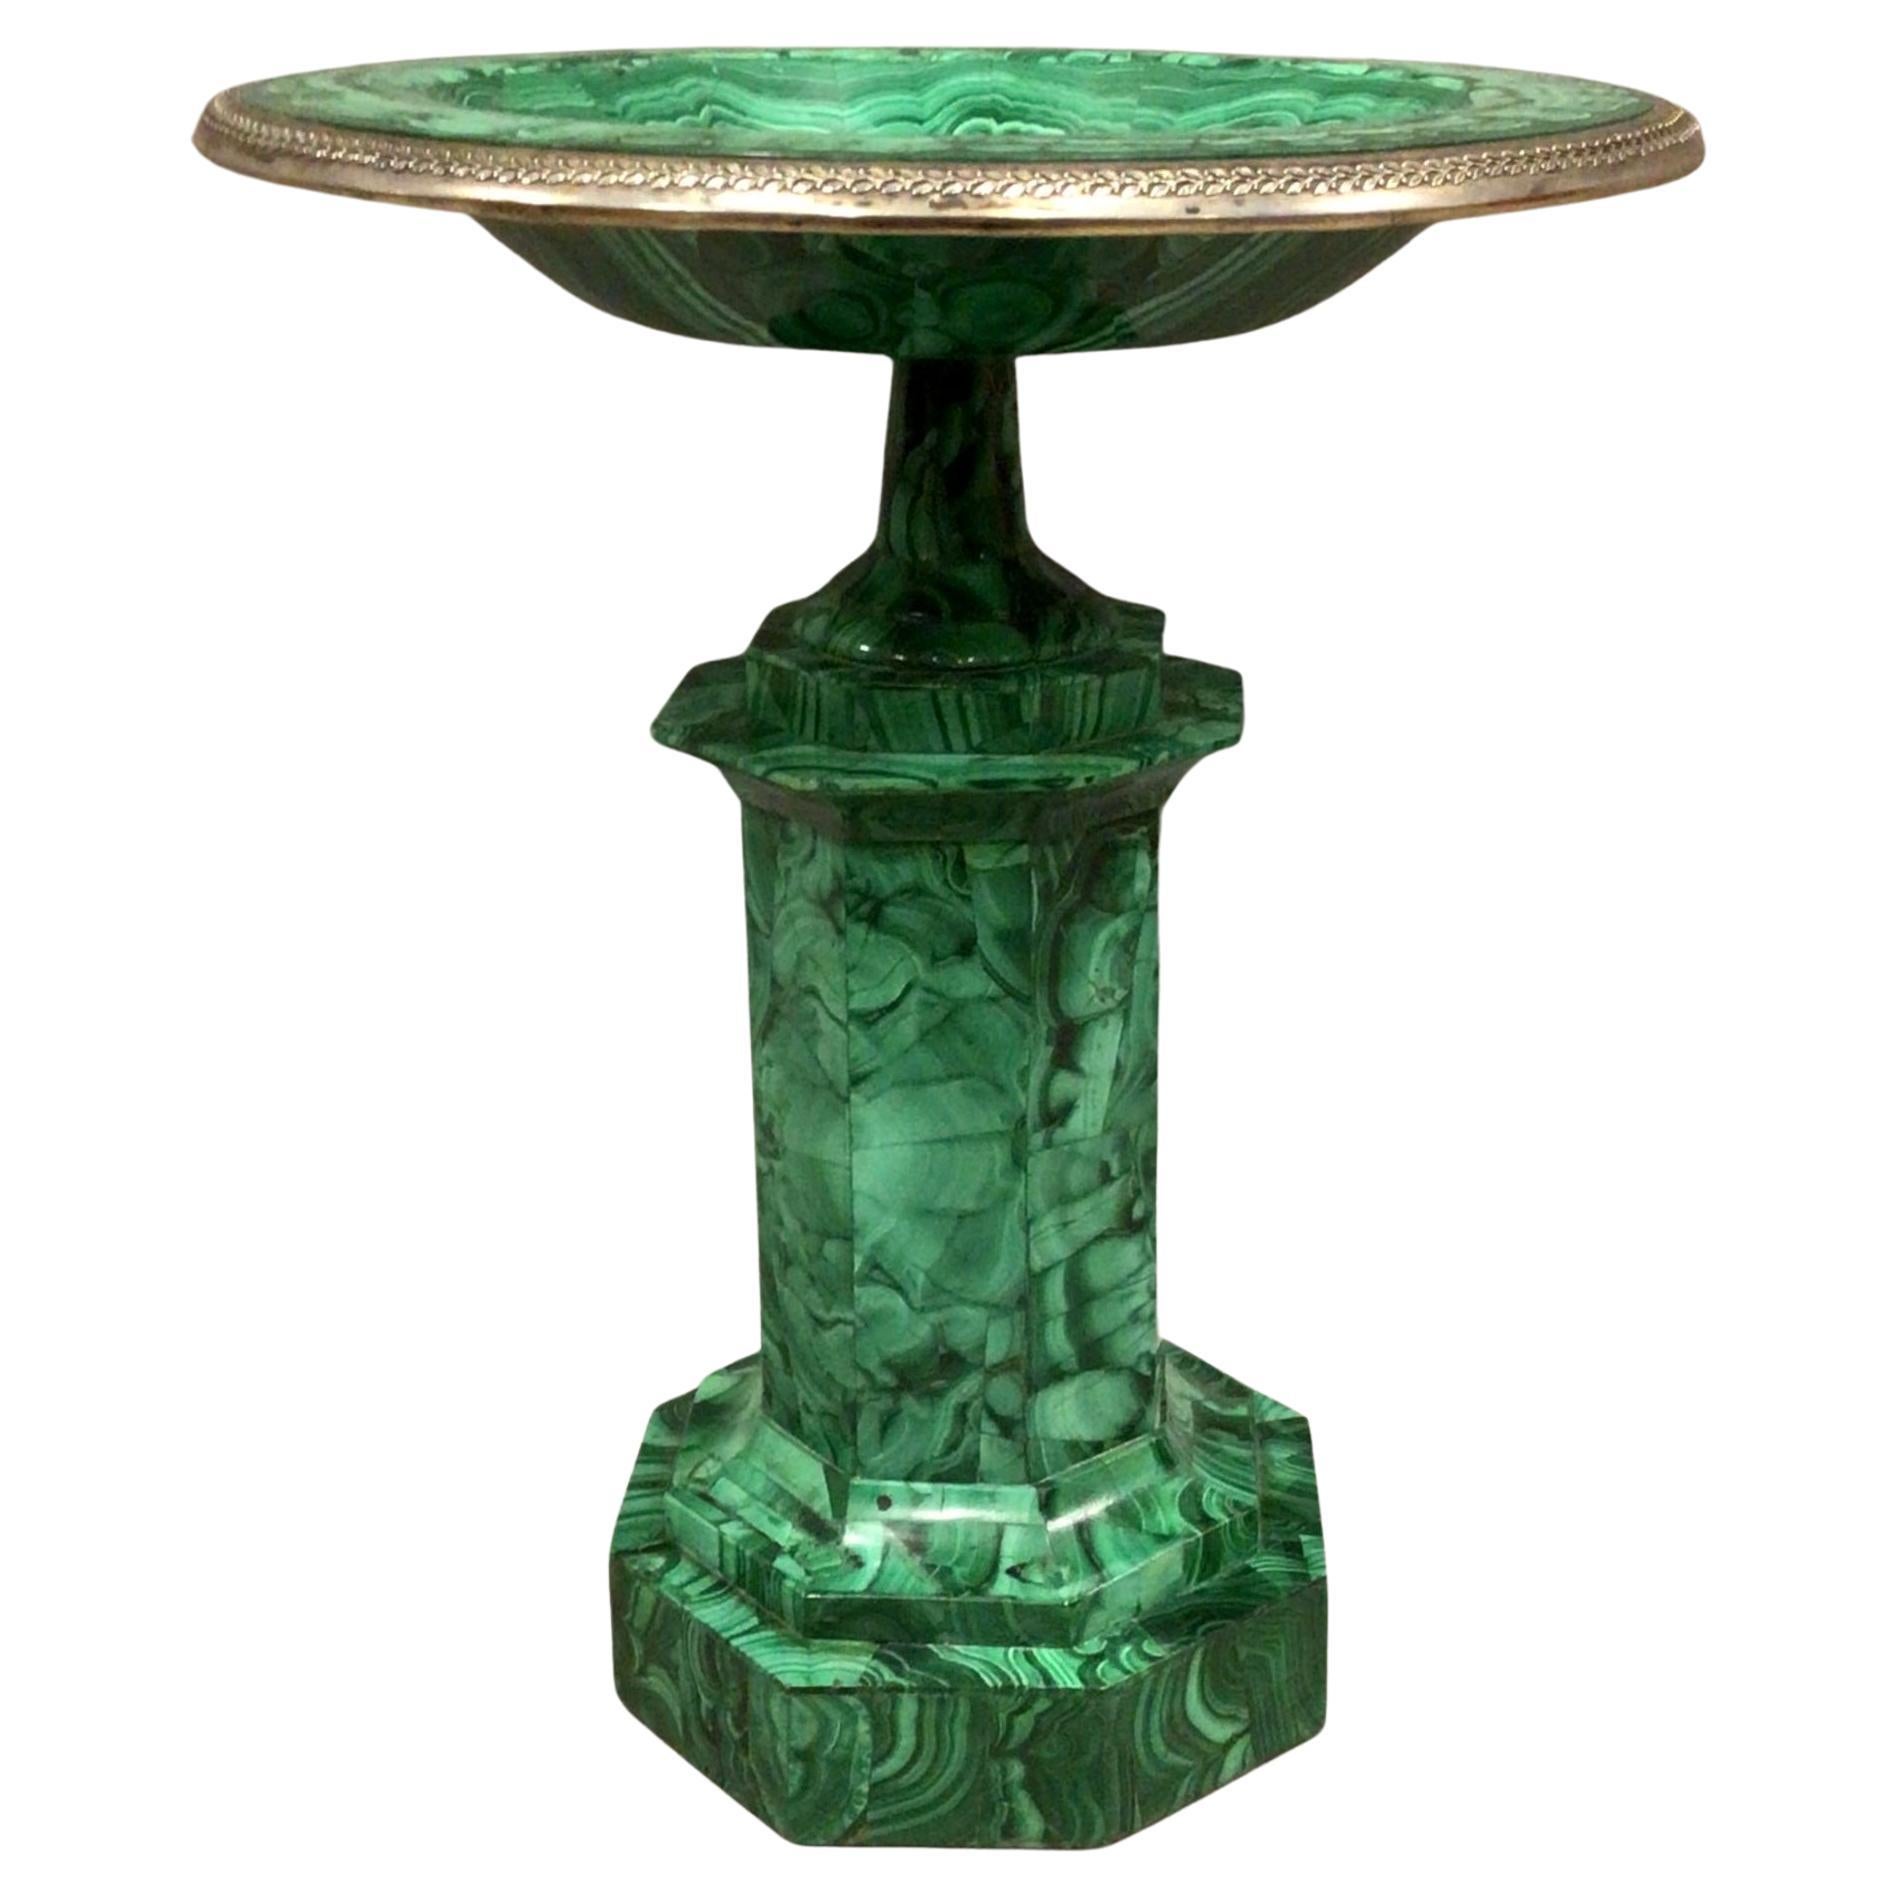 Exceptional Large C19th Malachite Tazza For Sale